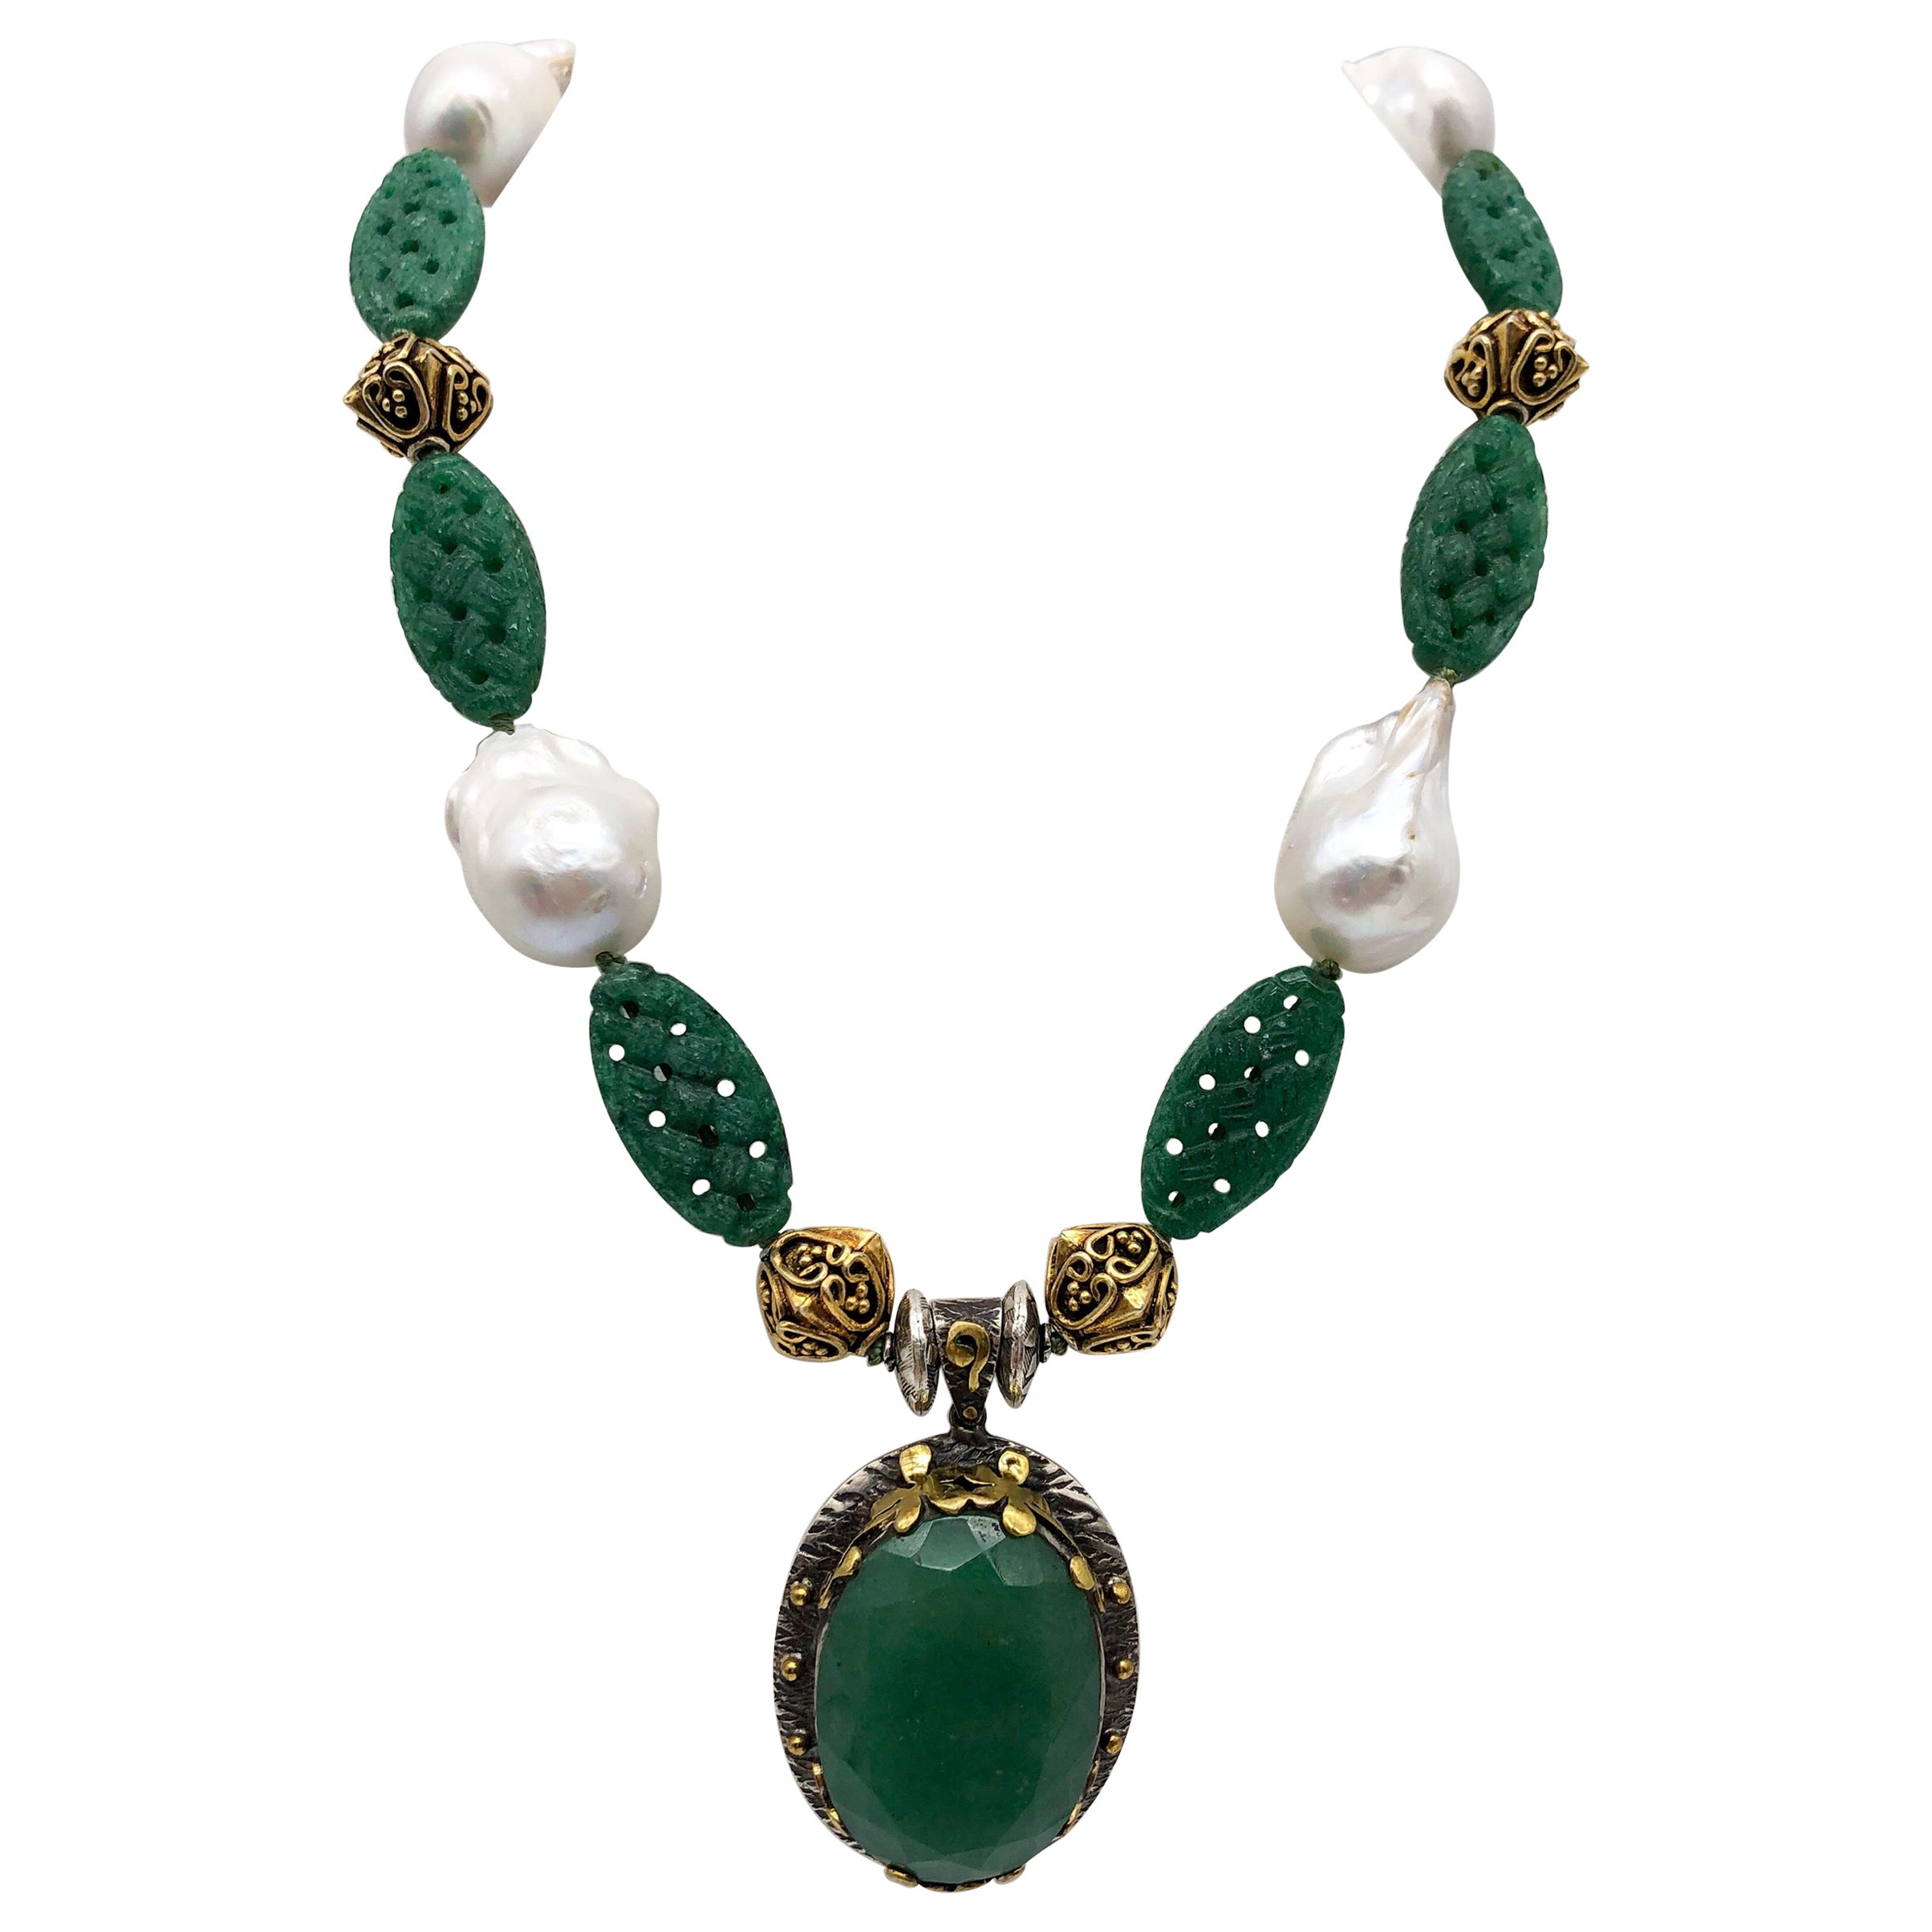 One-of-a-Kind

Handcrafted polished large Aventurine pendant created by Bora in an ornate sterling and brass frame. Suspended from an elegant necklace of carved Aventurine, ornate vermeil beads, and large lustrous Baroque Pearls. A clever set of